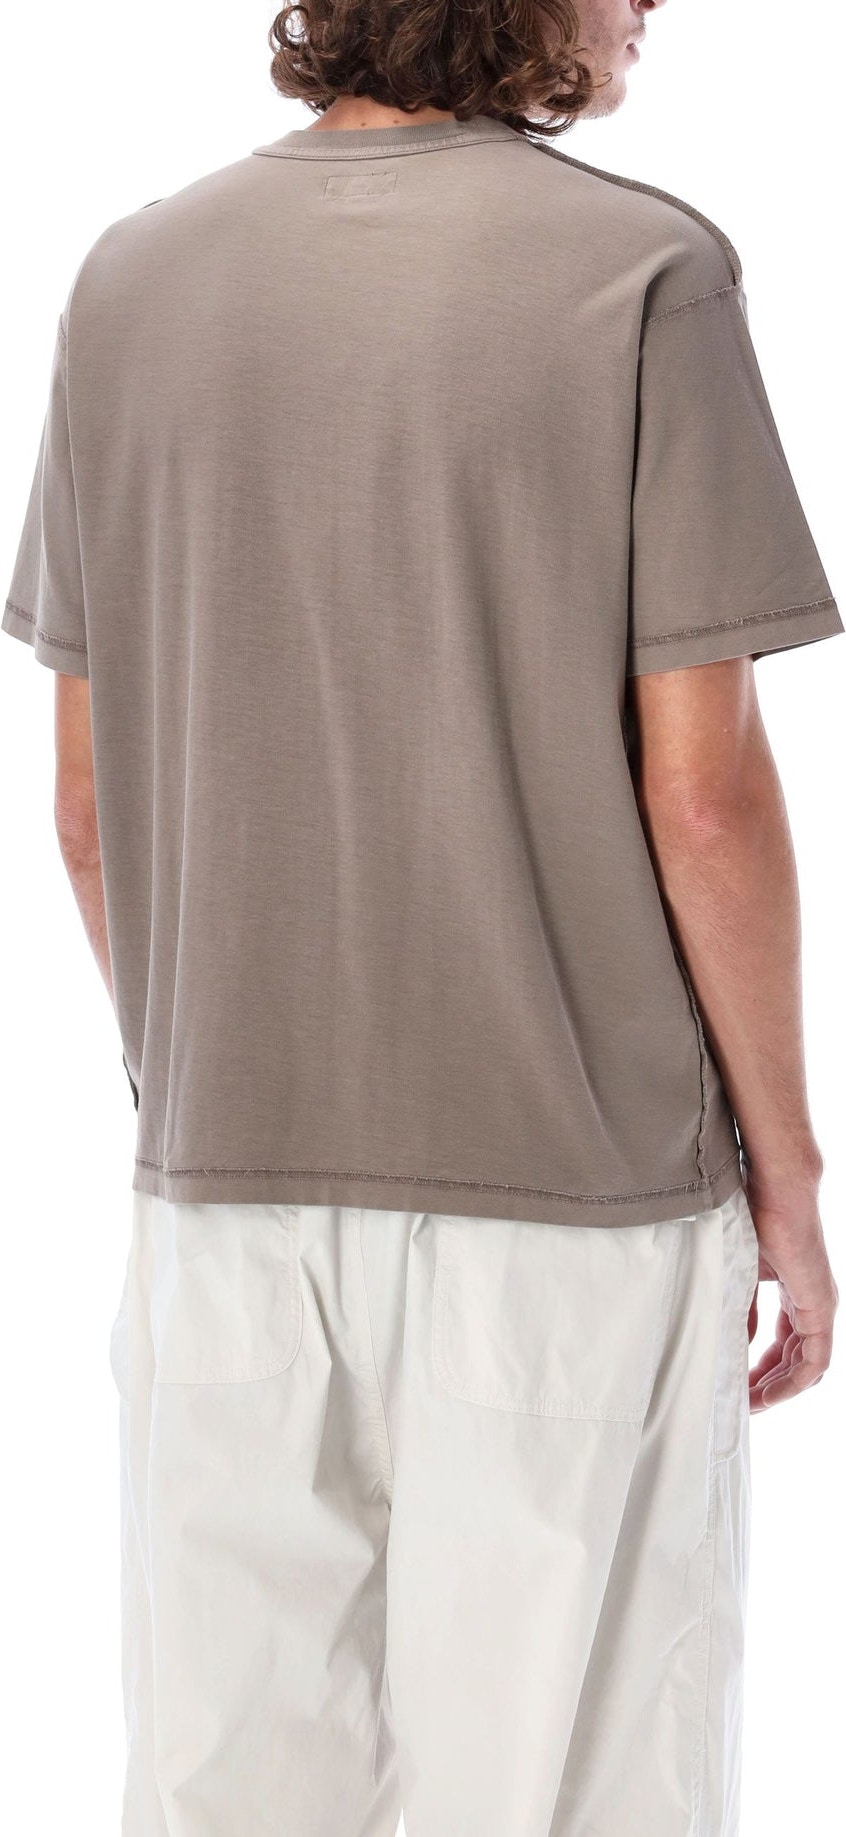 BROW STUSSY PIGMENT DYED INSIDE OUT T-SHIRT